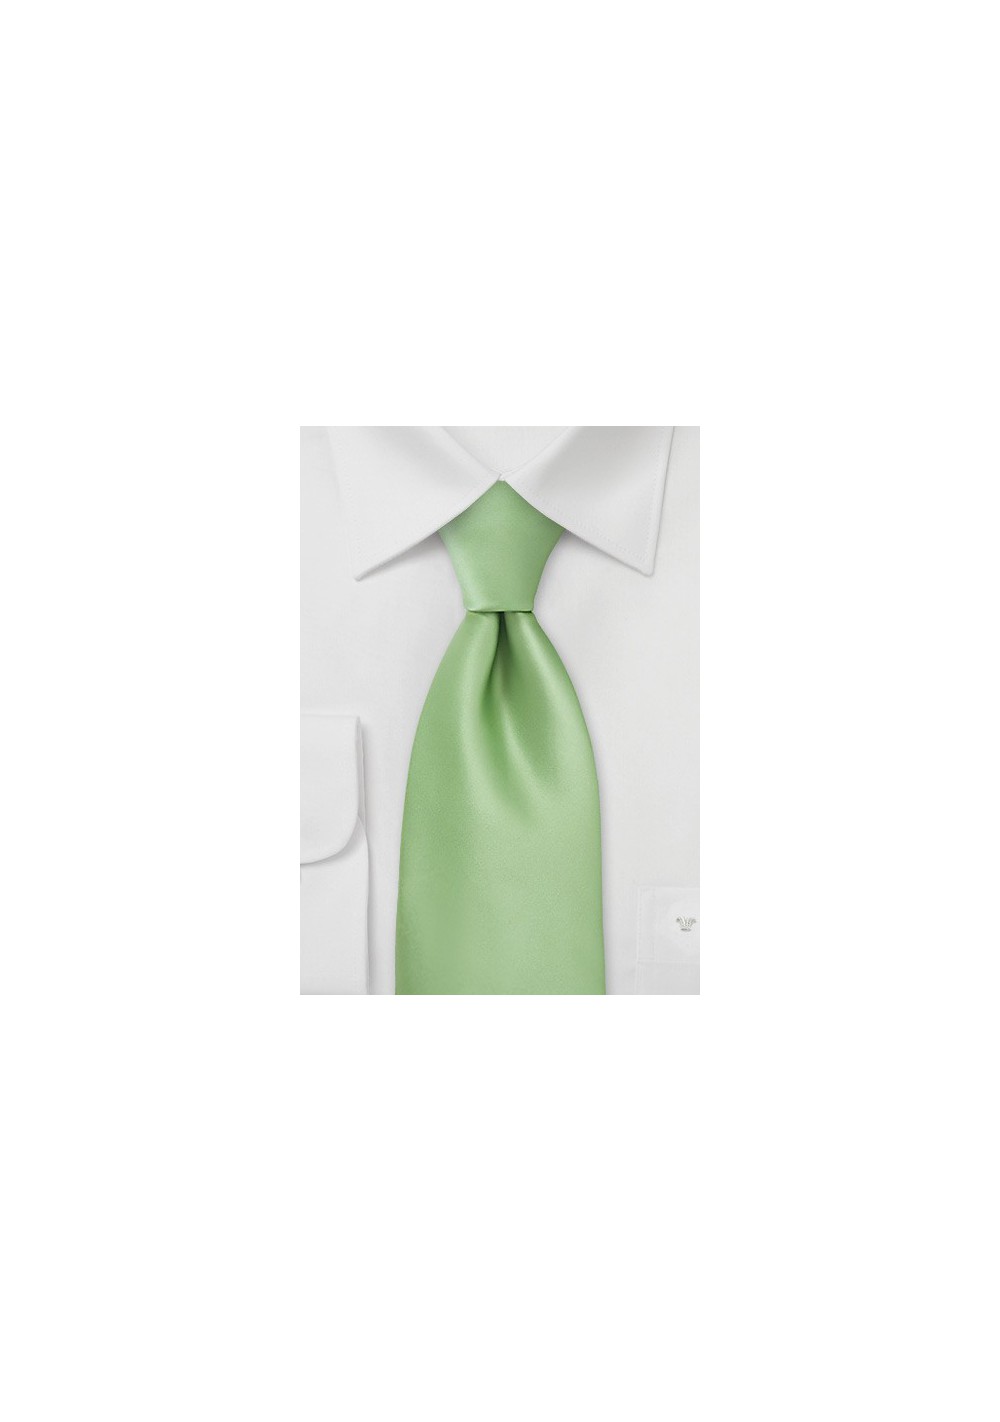 Key Lime Tie in XL Length